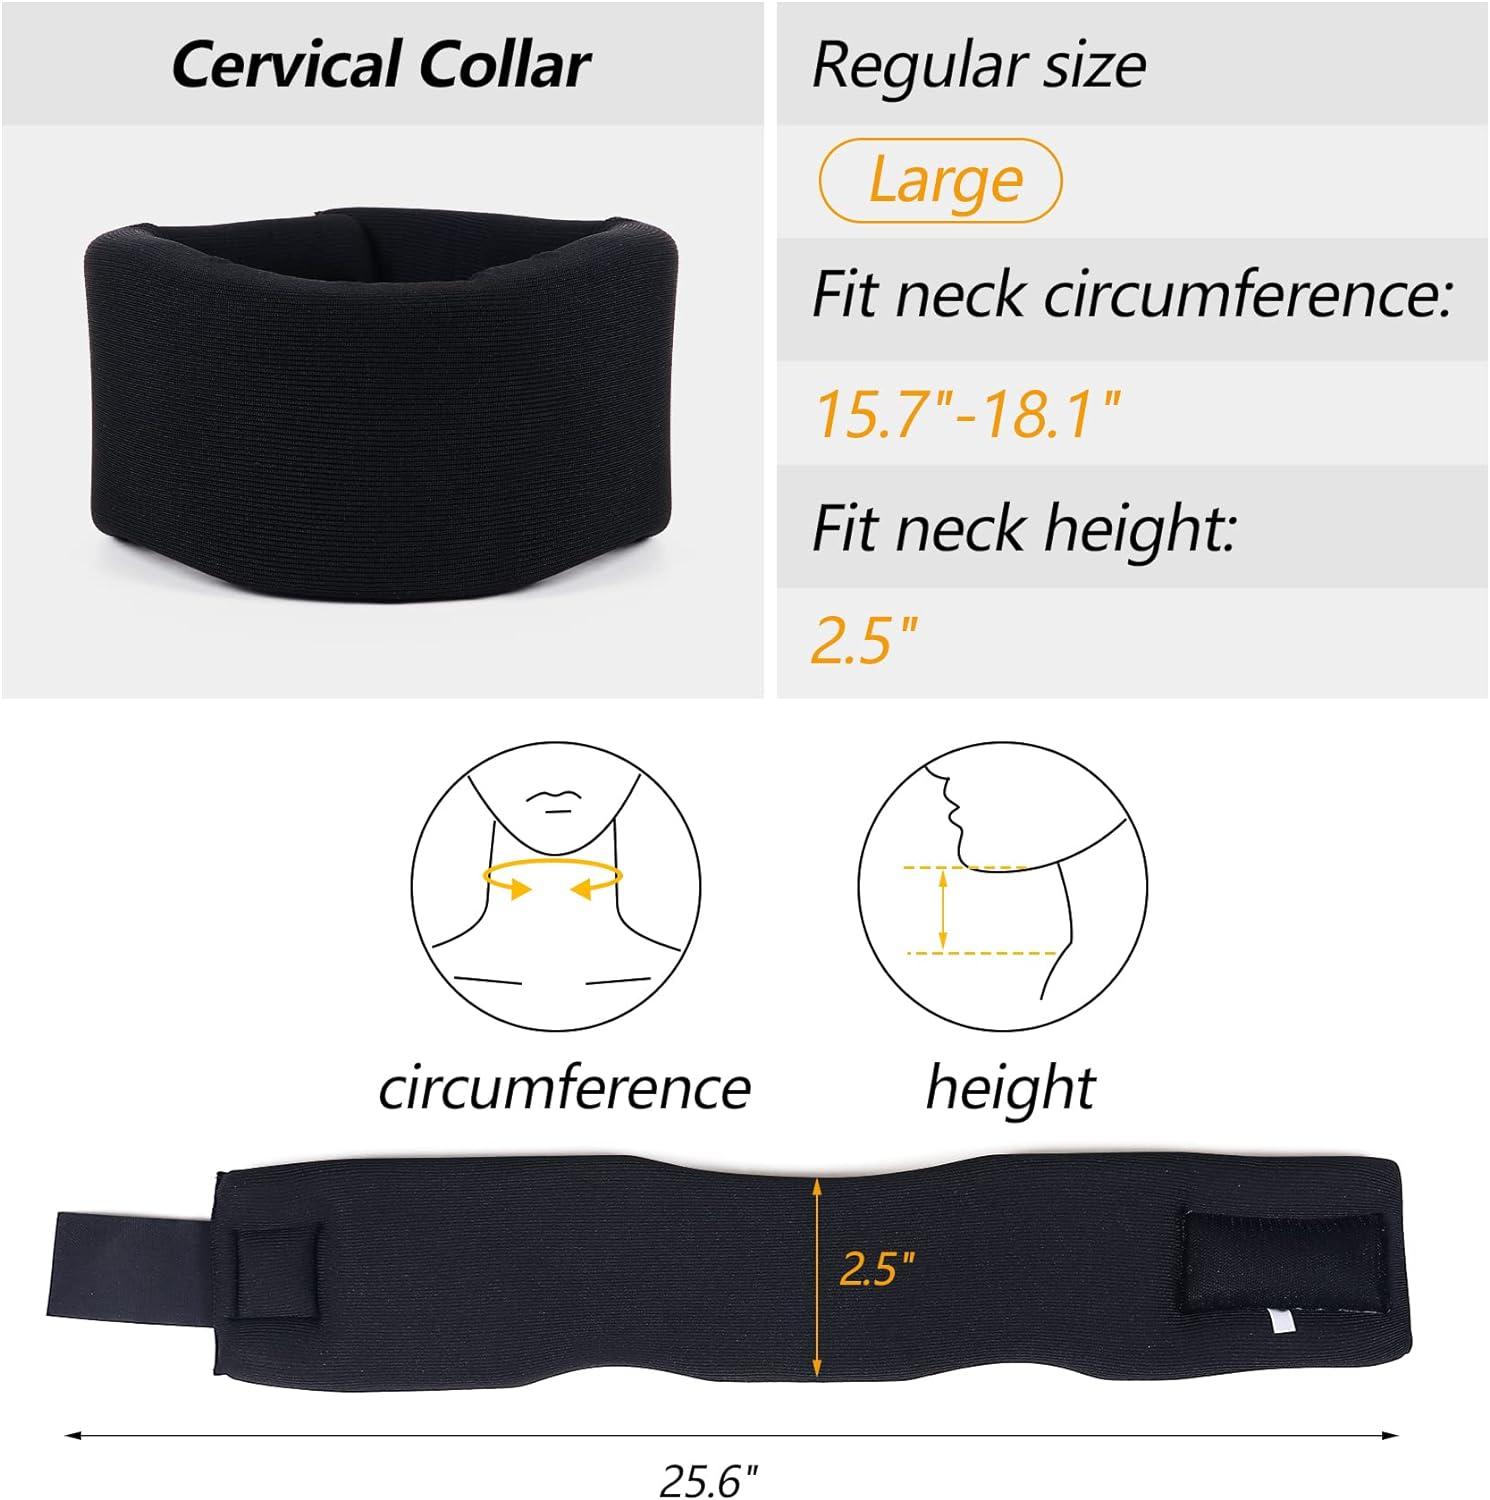  Soft Foam Neck Brace Universal Cervical Collar, Adjustable Neck  Support Brace for Sleeping - Relieves Neck Pain and Spine Pressure, Neck  Collar After Whiplash or Injury(Black 2.5 Depth Collar, M) 